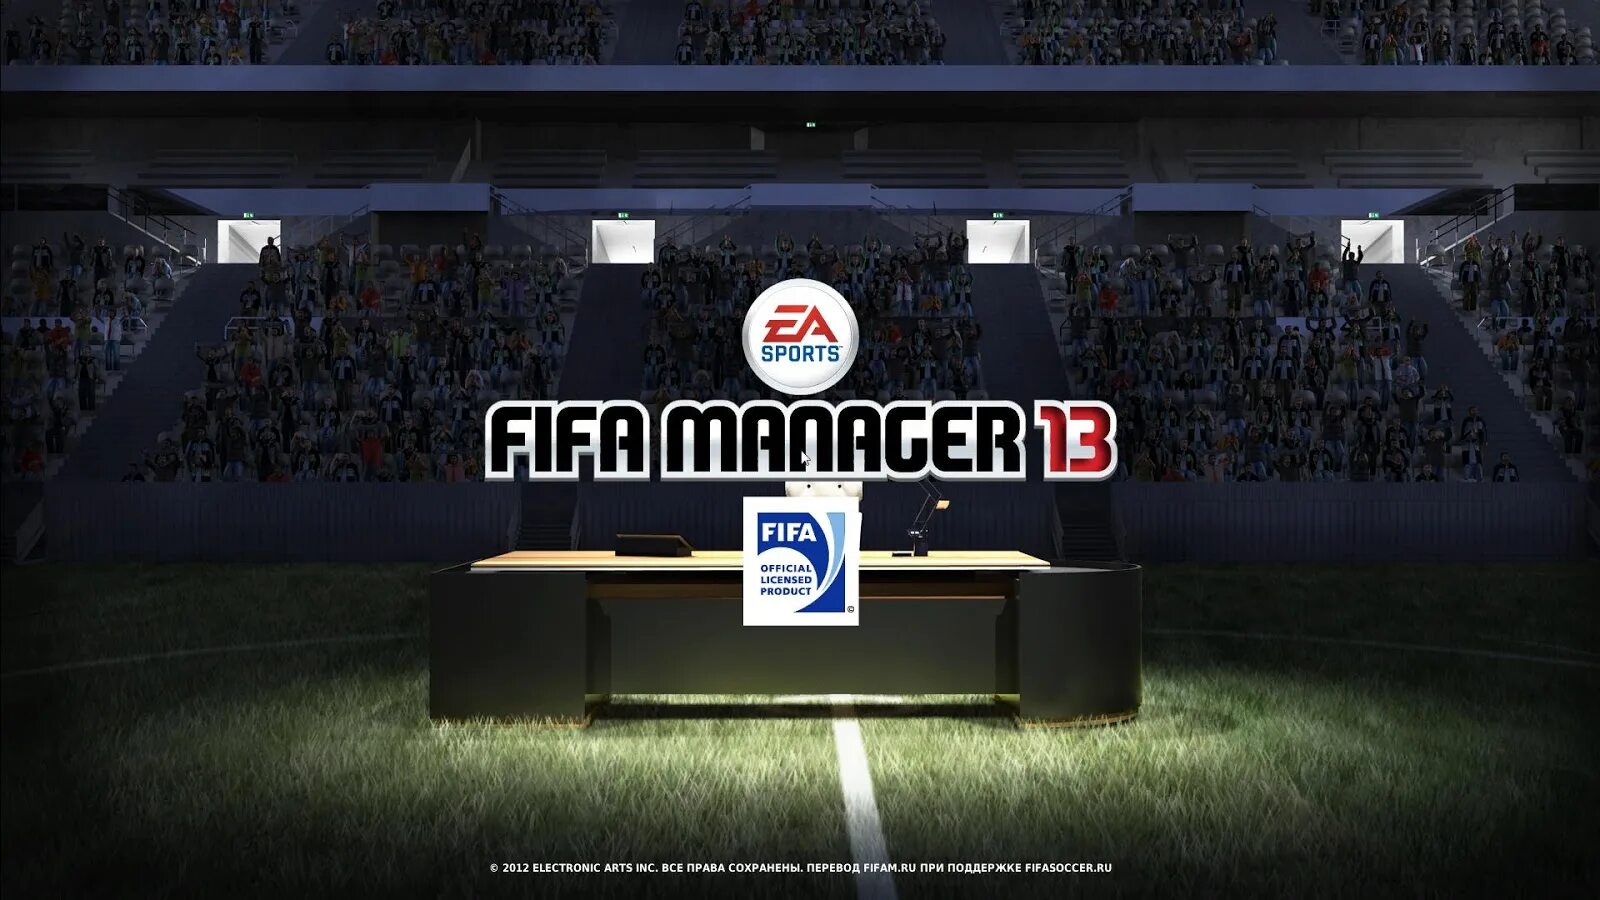 ФИФА менеджер 13. ФИФА менеджер 14. FIFA Manager 12. FIFA Manager 2013 логотипы.